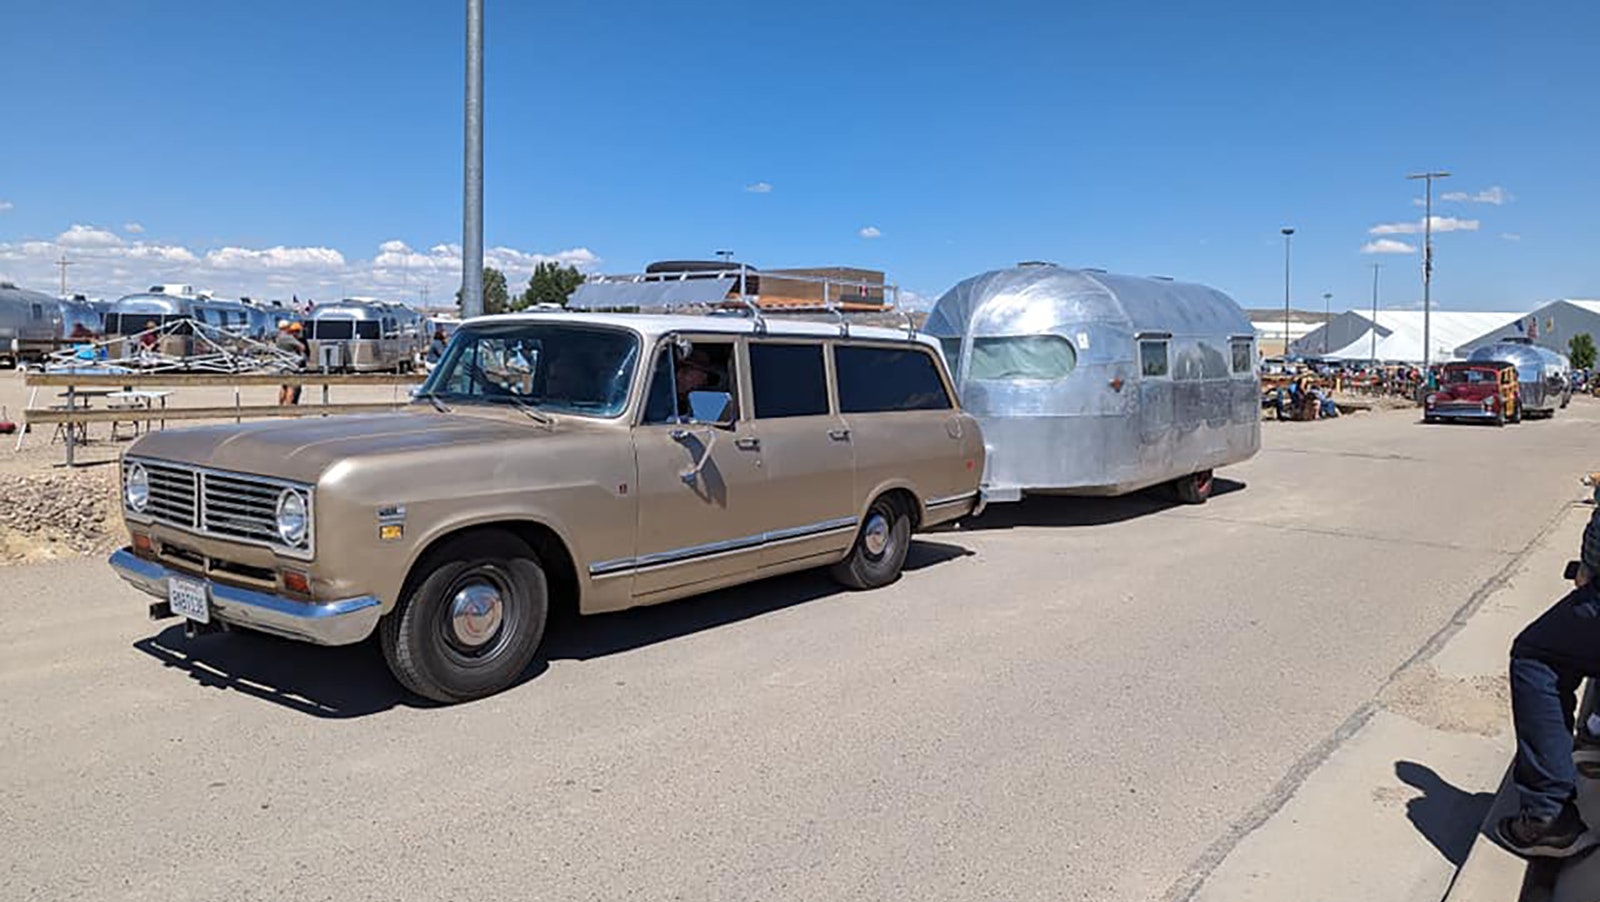 Vintage Airstreams on display during a parade in downtown Rock Springs.